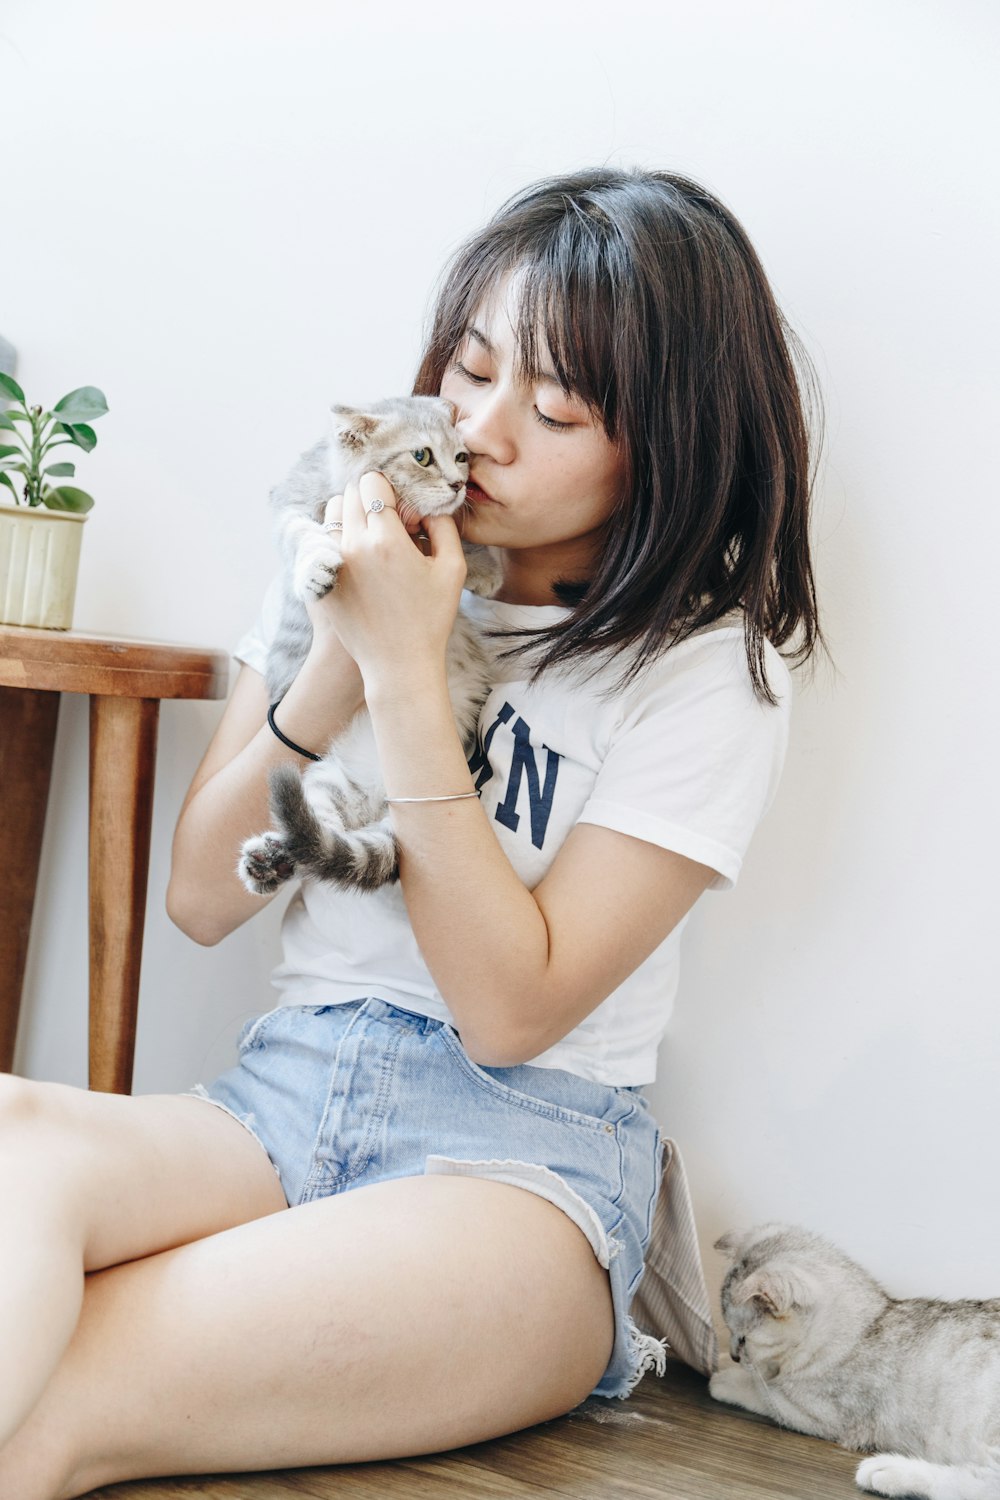 woman sitting and kissing kitten